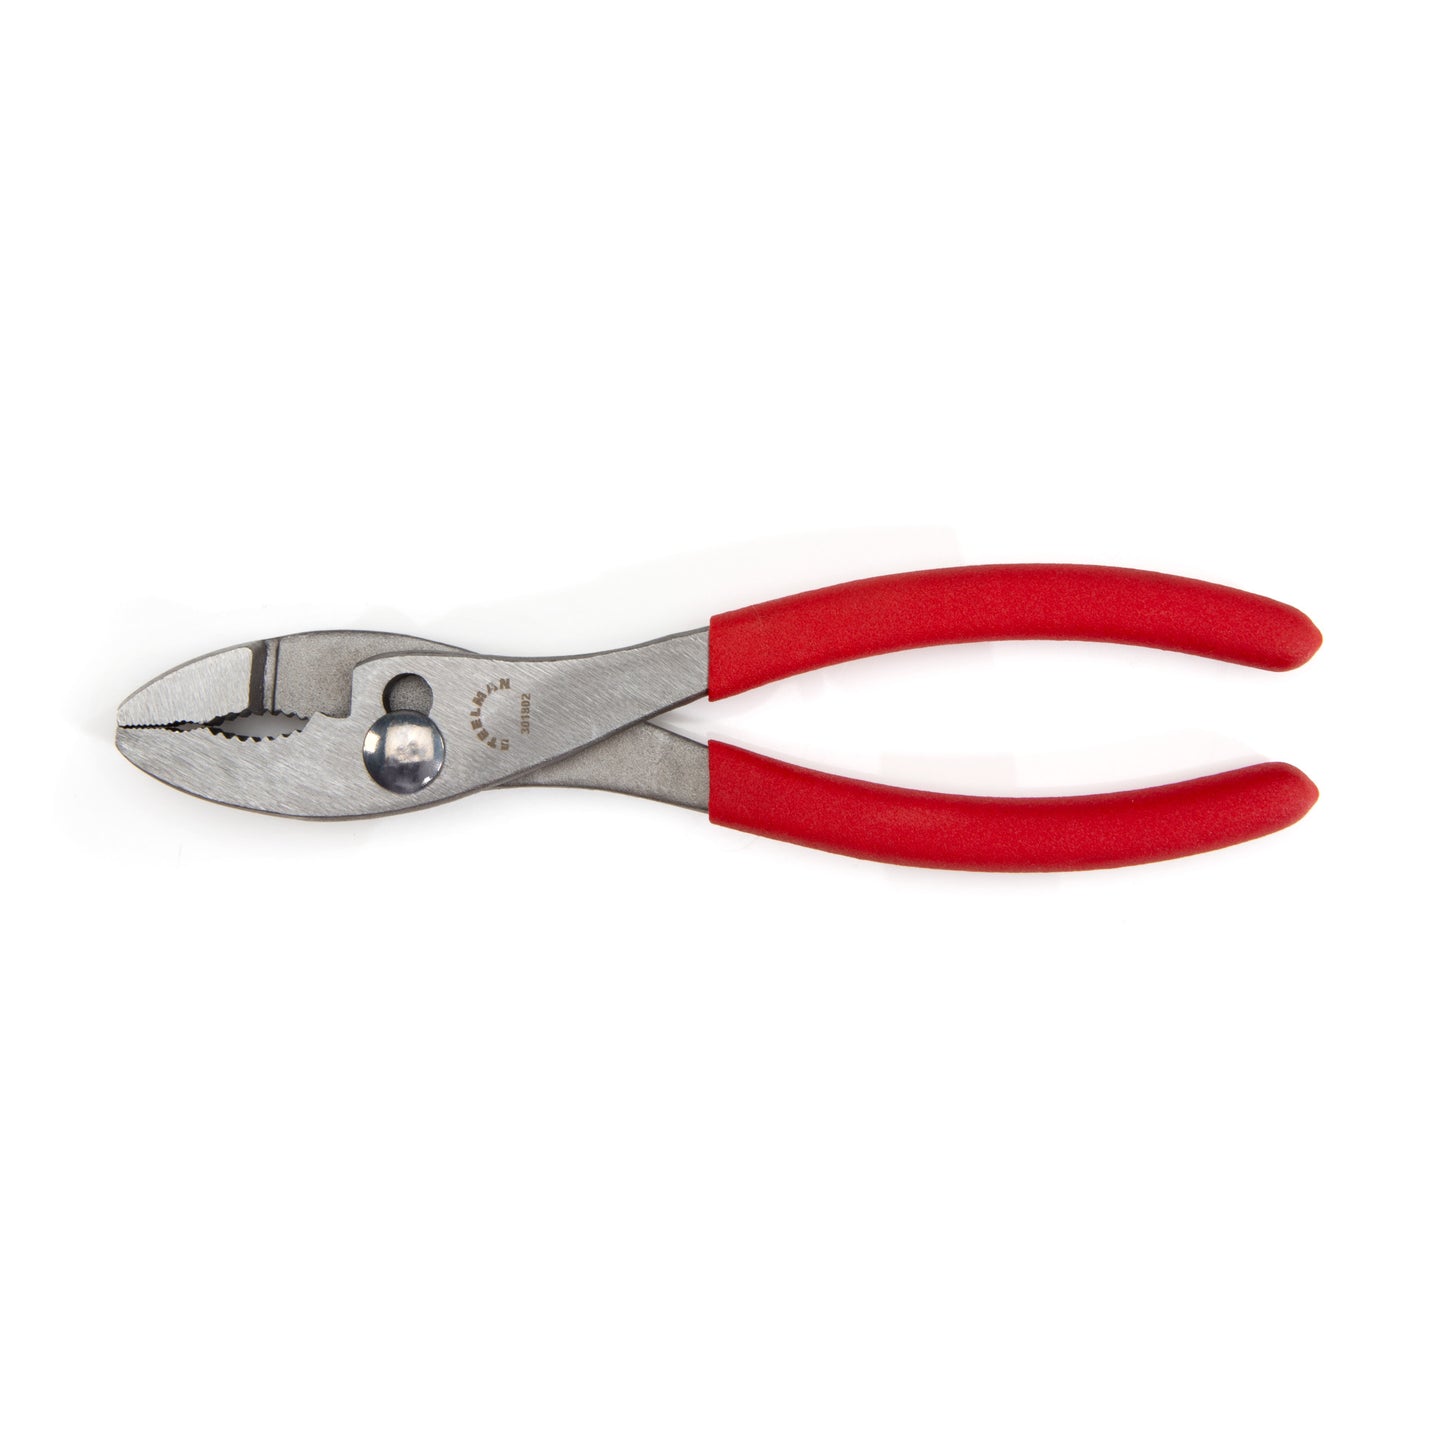 8-inch Slip-Joint Pliers with Wire Cutter